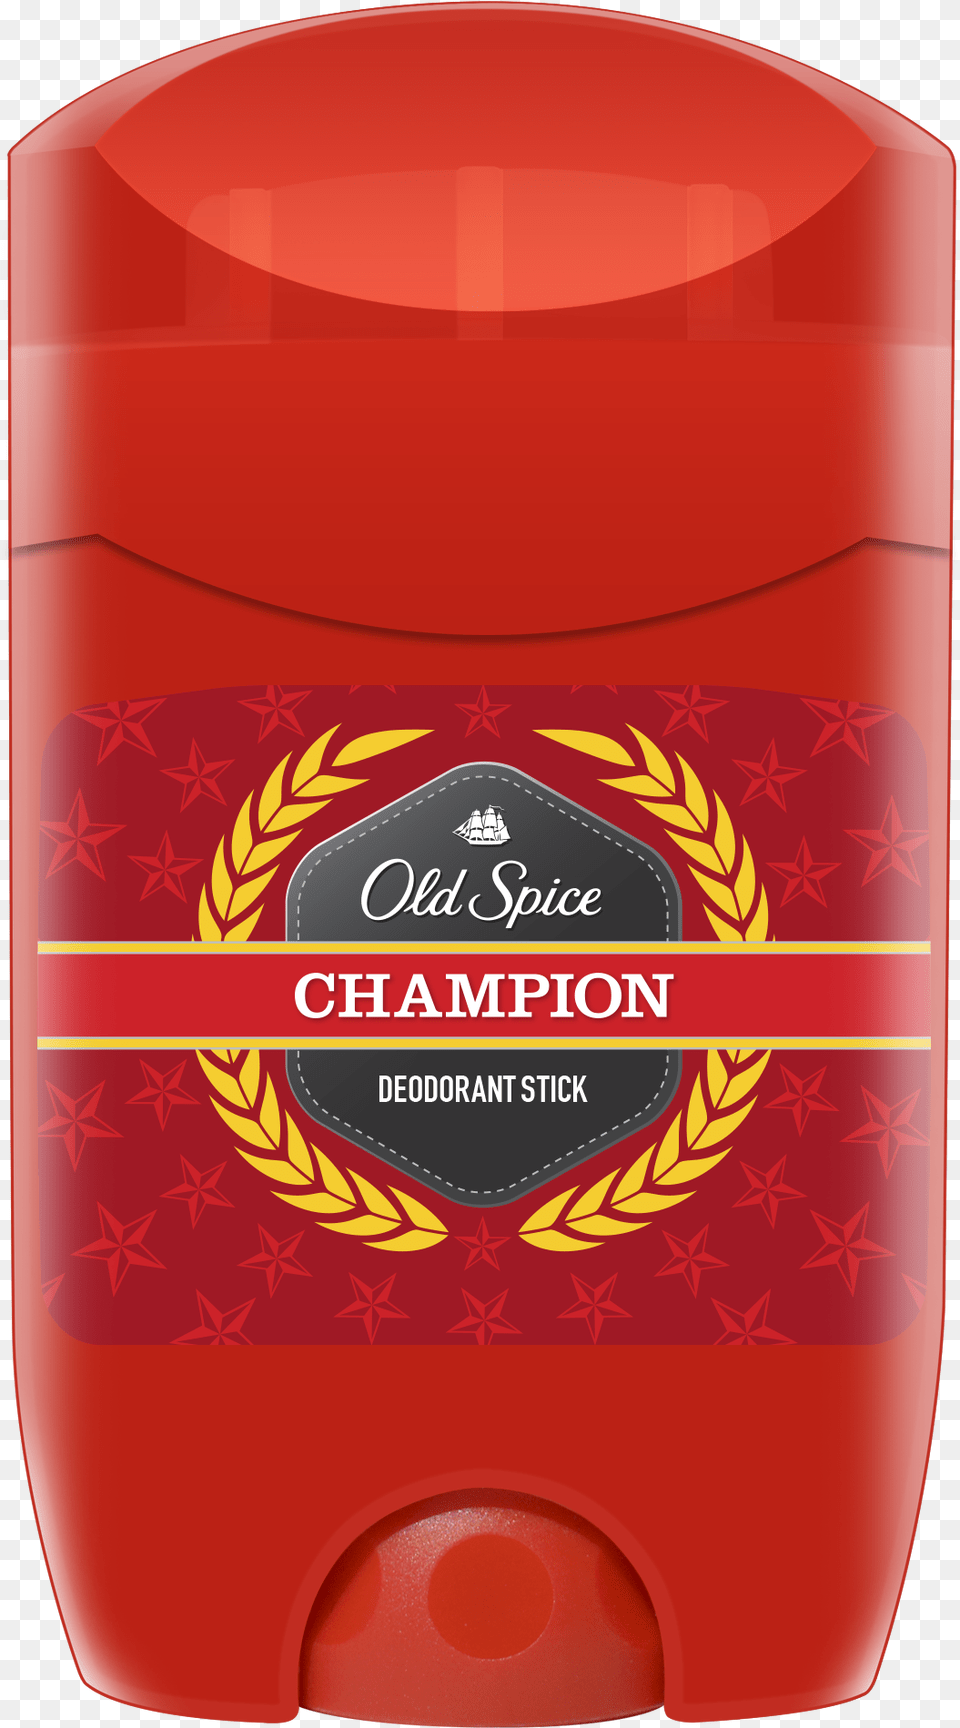 Deodorant Stick Old Spice Champion 50 Ml Old Spice Champion Deodorant Stick, Cosmetics, Dynamite, Weapon Png